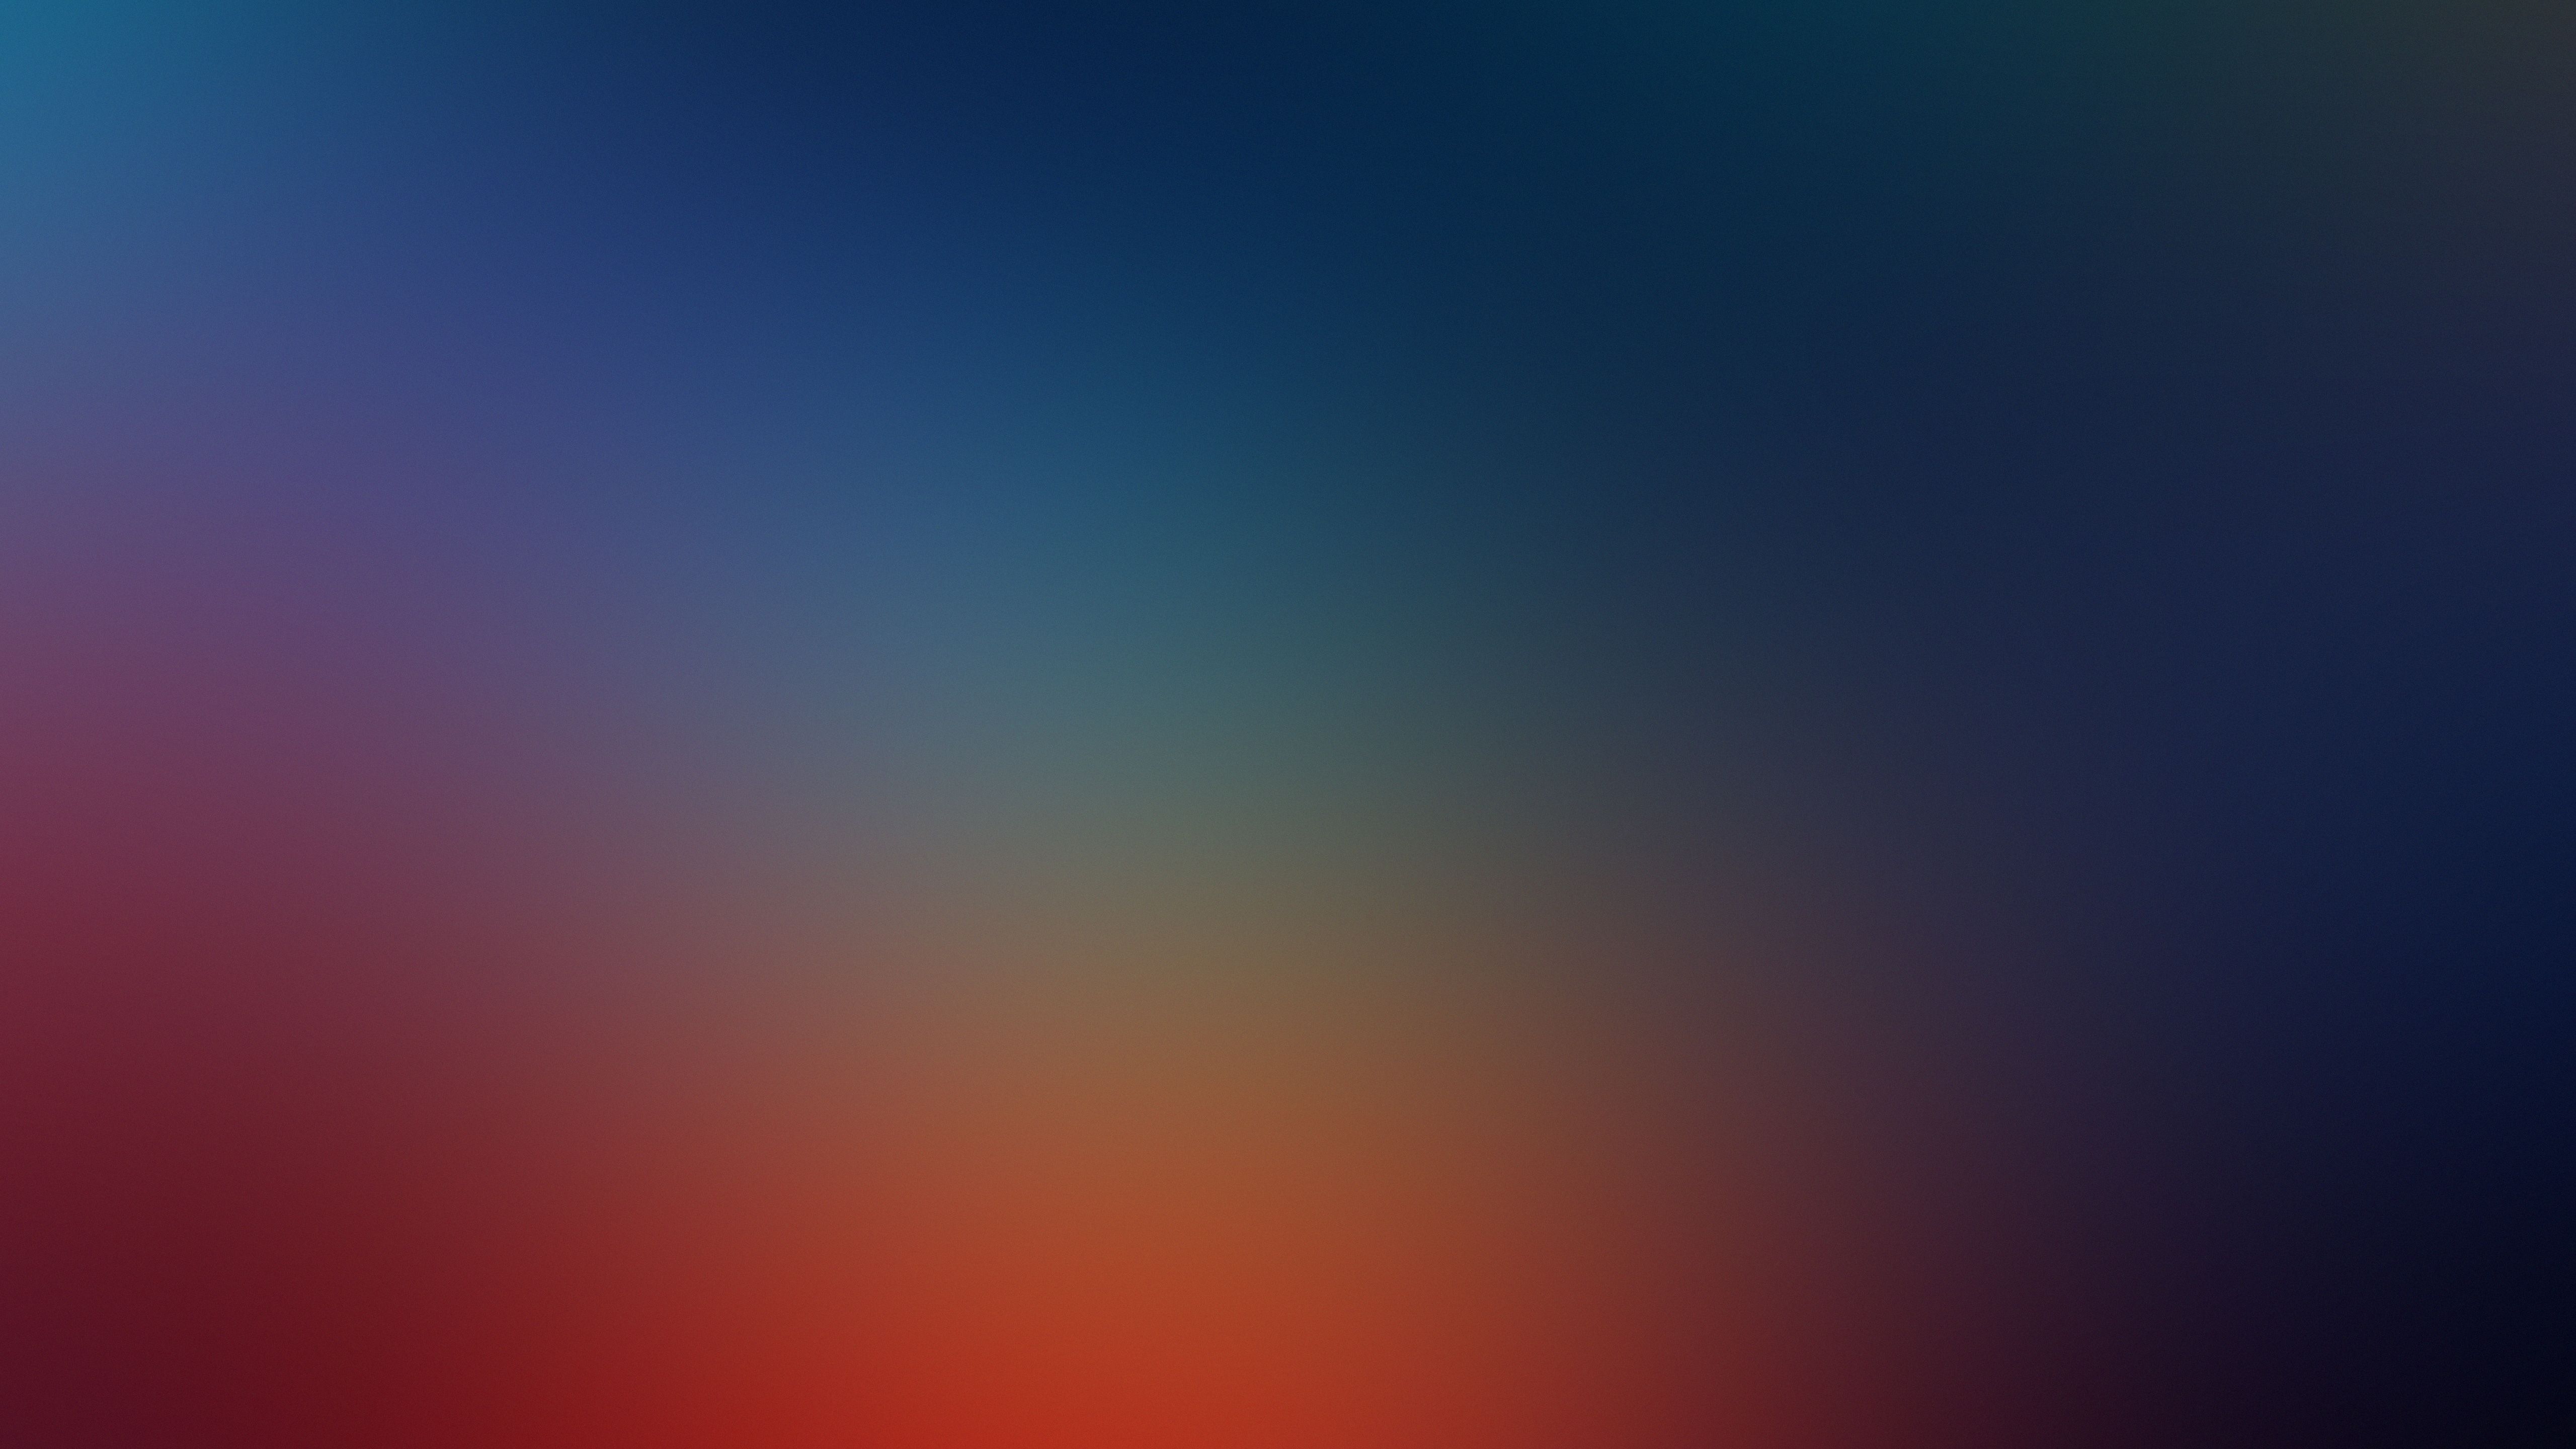 A red and blue gradient background - Blurry